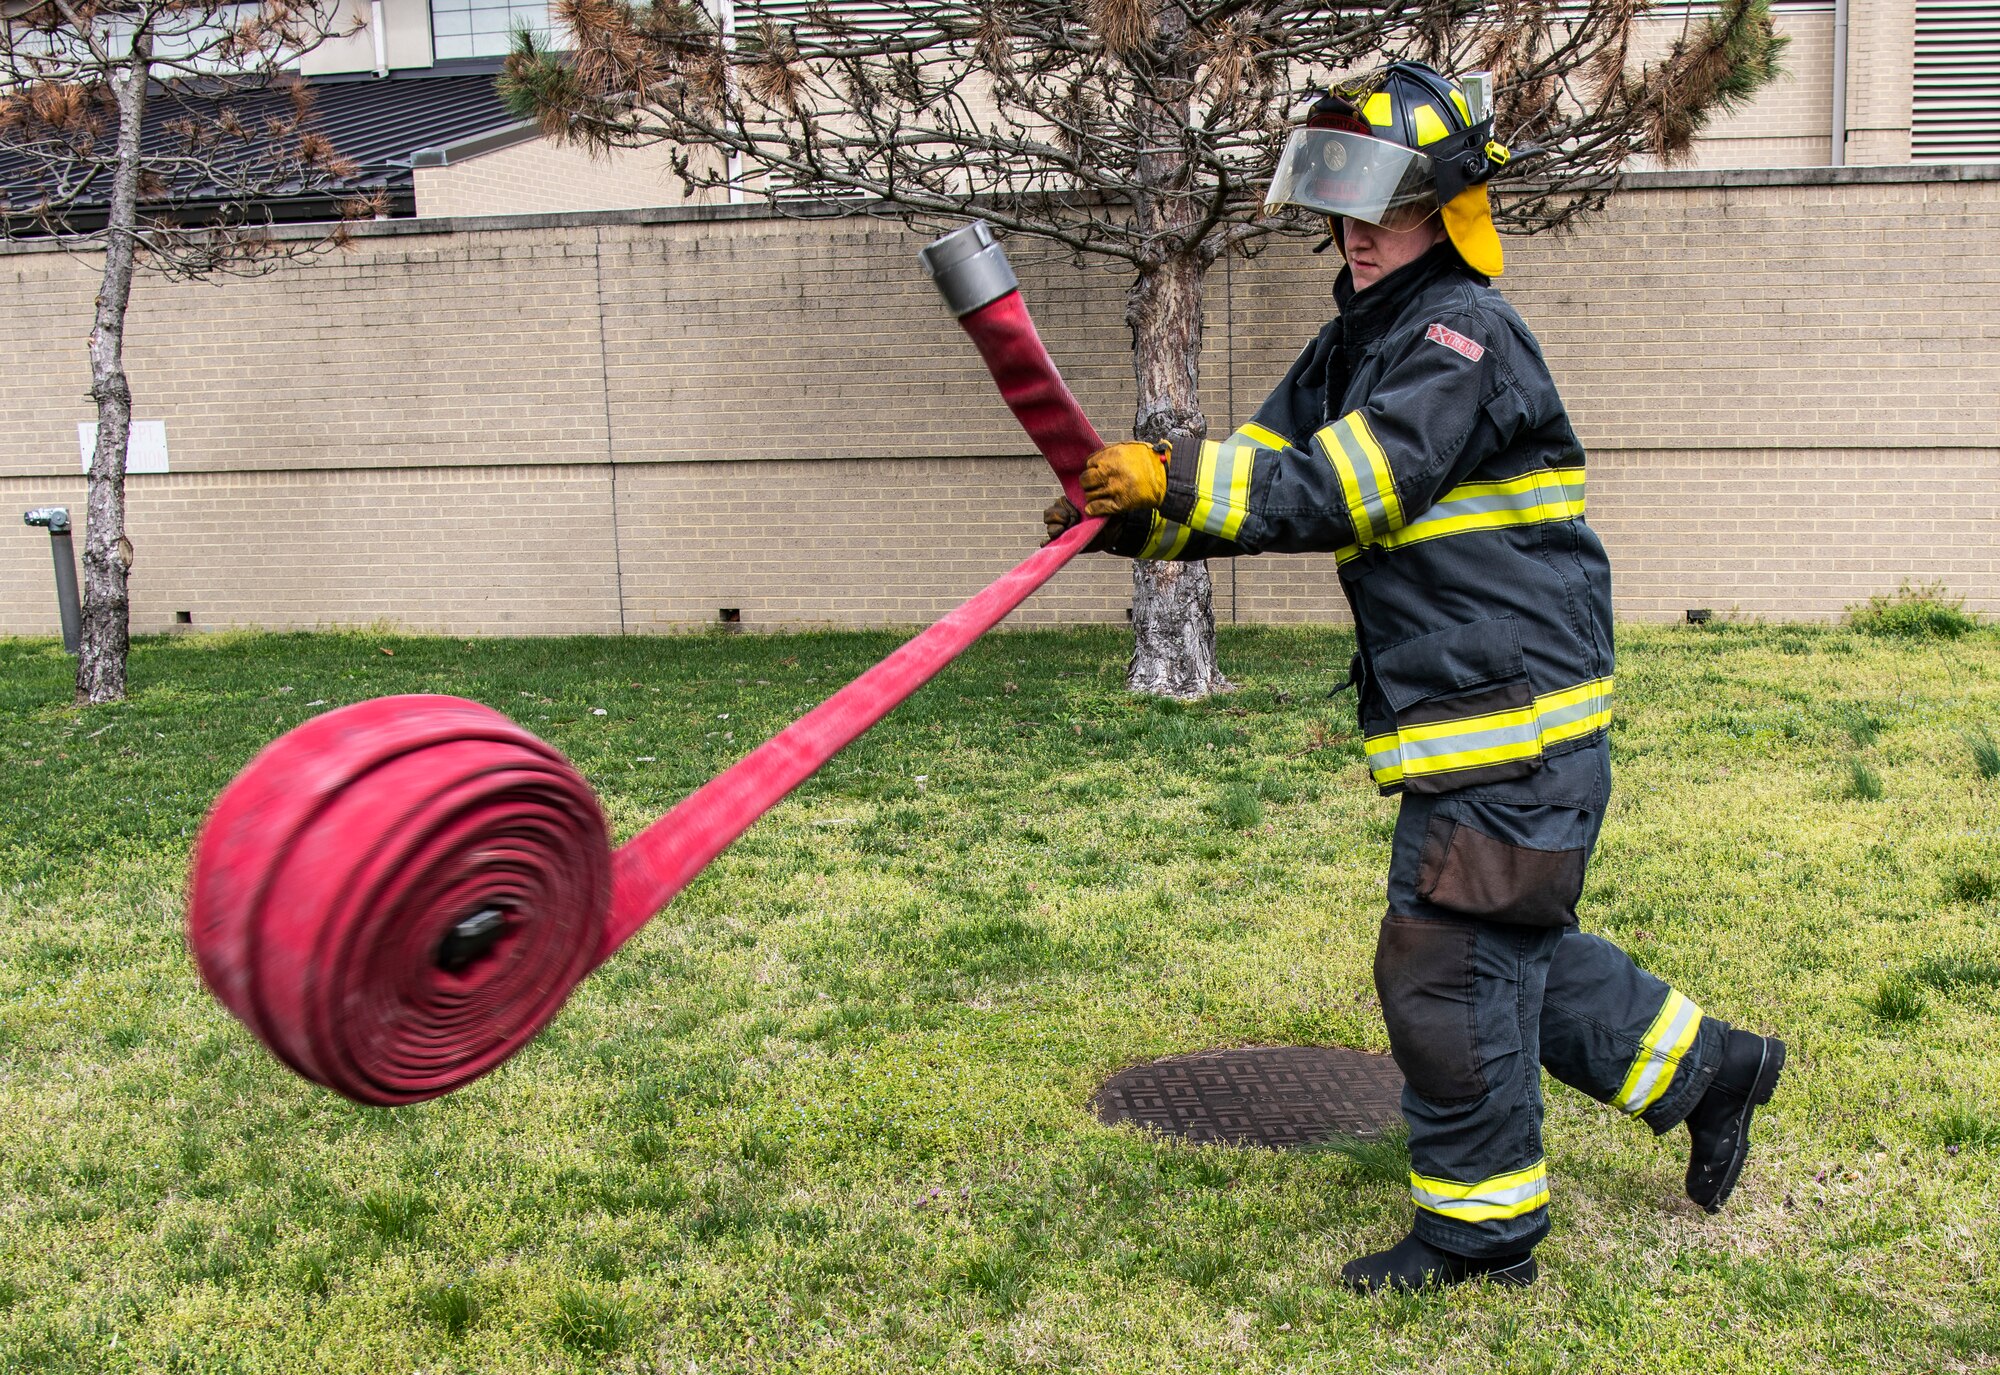 Airman 1st Class Dayton Holtkamp, 436th Civil Engineer Squadron firefighter, inspects a hose at Dover Air Force Base, Delaware, March 30, 2020. Despite the COVID-19 pandemic and signifcantly reduced manning, Dover AFB fire remains ready for emergencies and to support response efforts.  (U.S. Air Force photo by Senior Airman Christopher Quail)